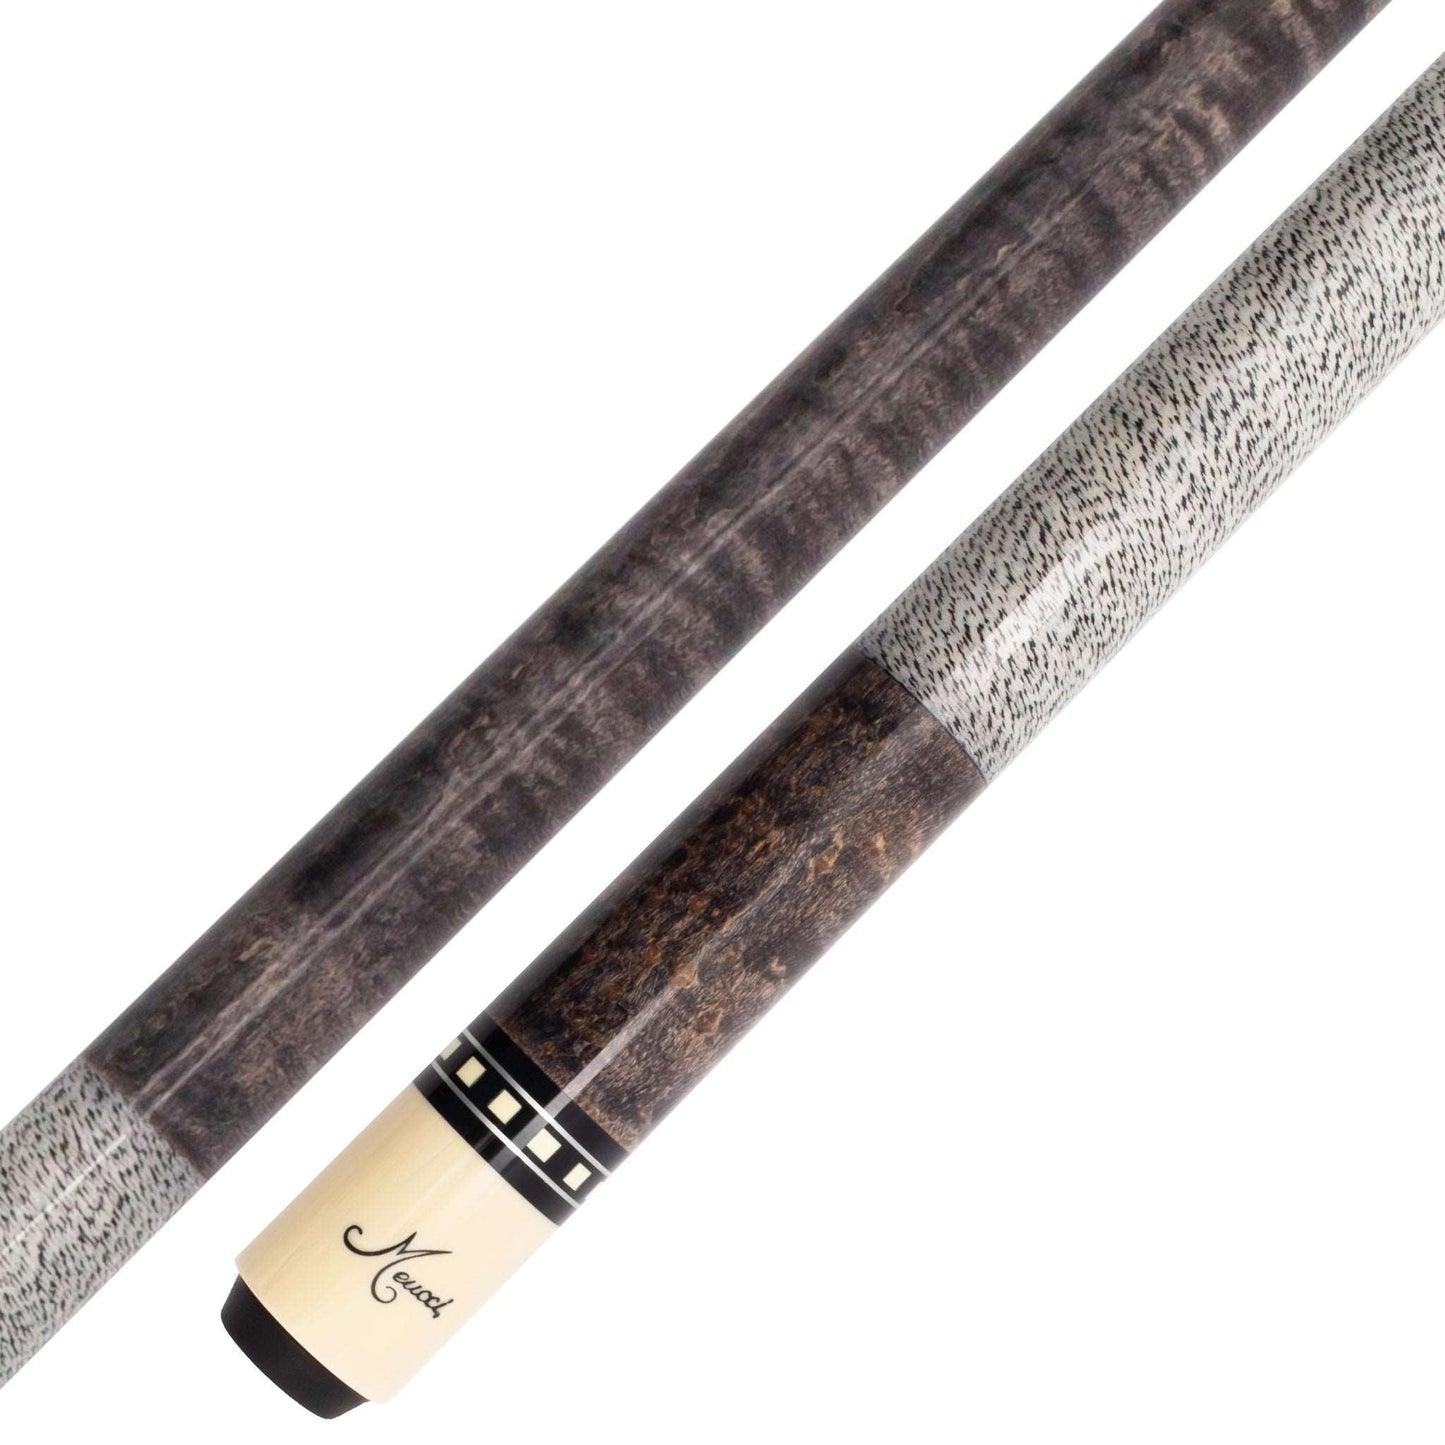 JS Smoke Stained Meucci Cue